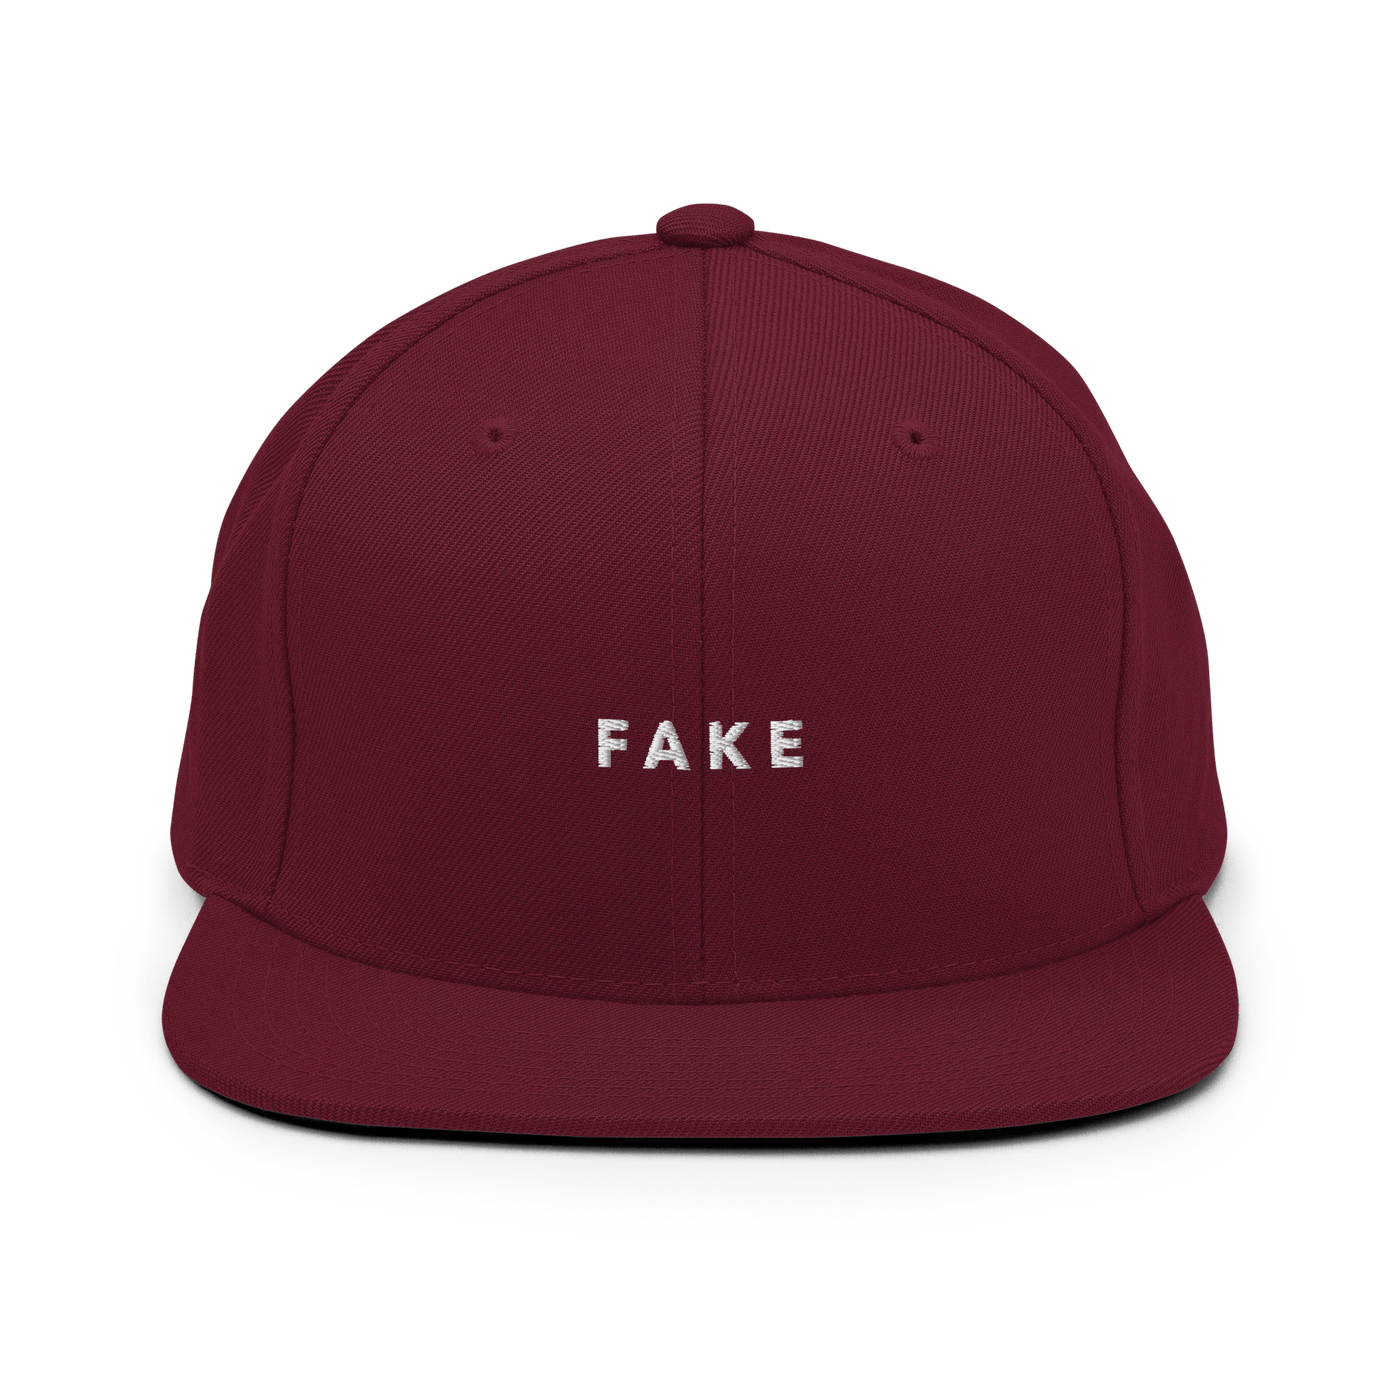 FAKE Snapback Hat - Maroon - - Just Another Cap Store